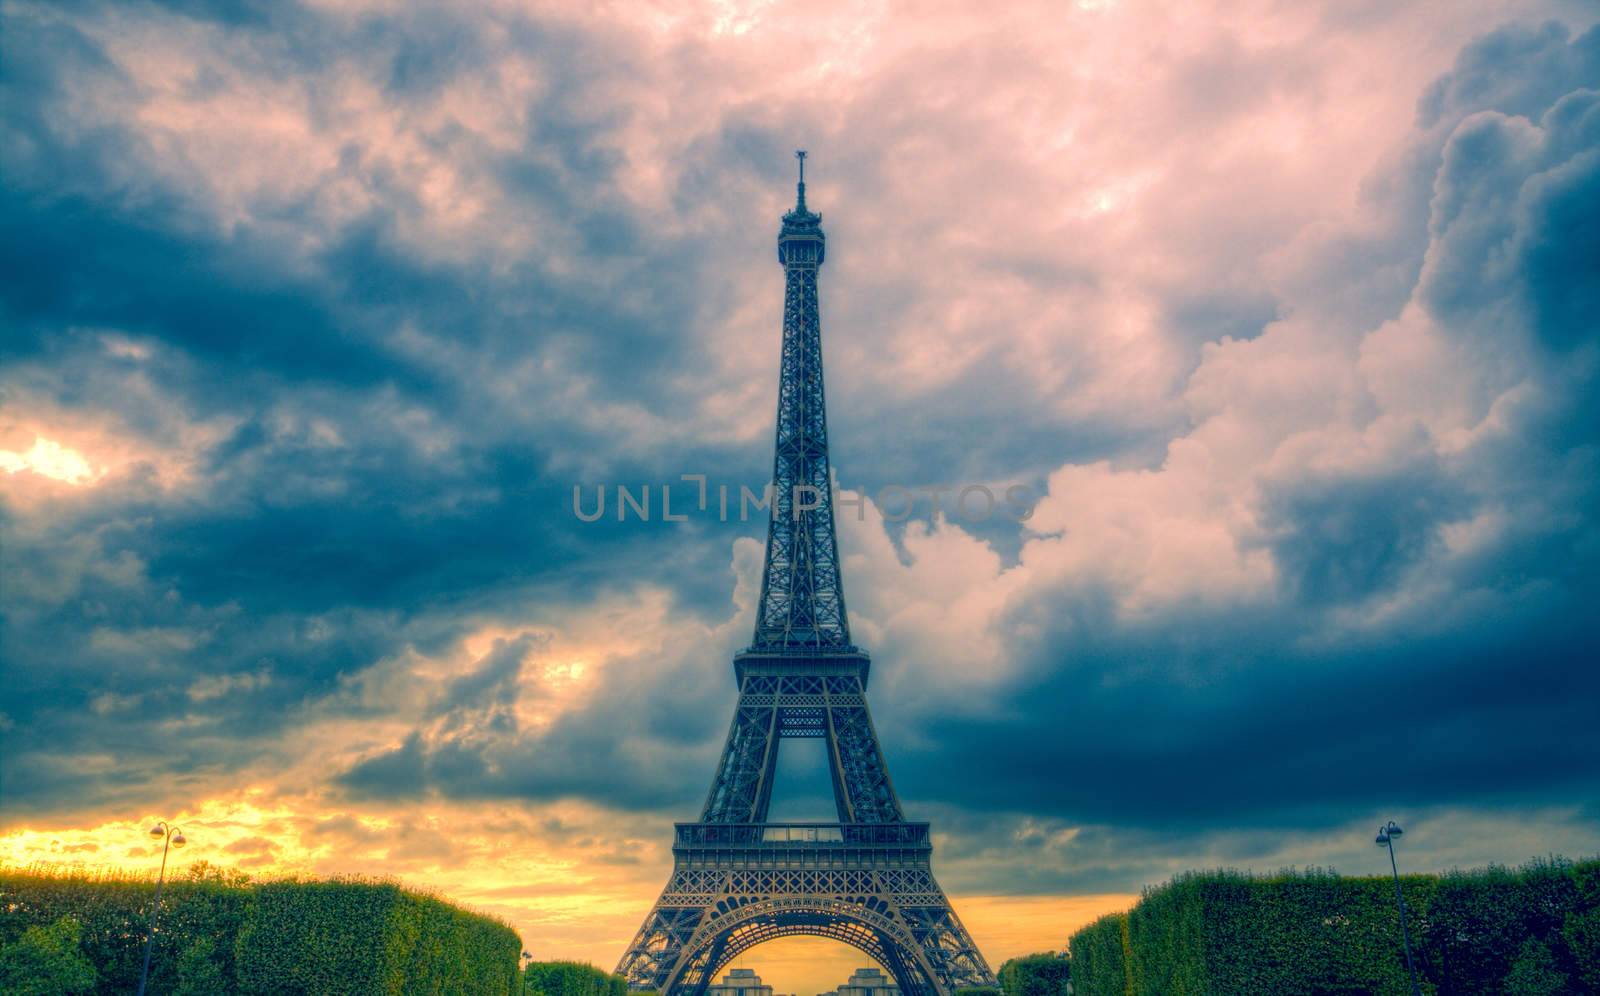 Dramatic clouds forming over Eiffel Tower in Paris on summer evening